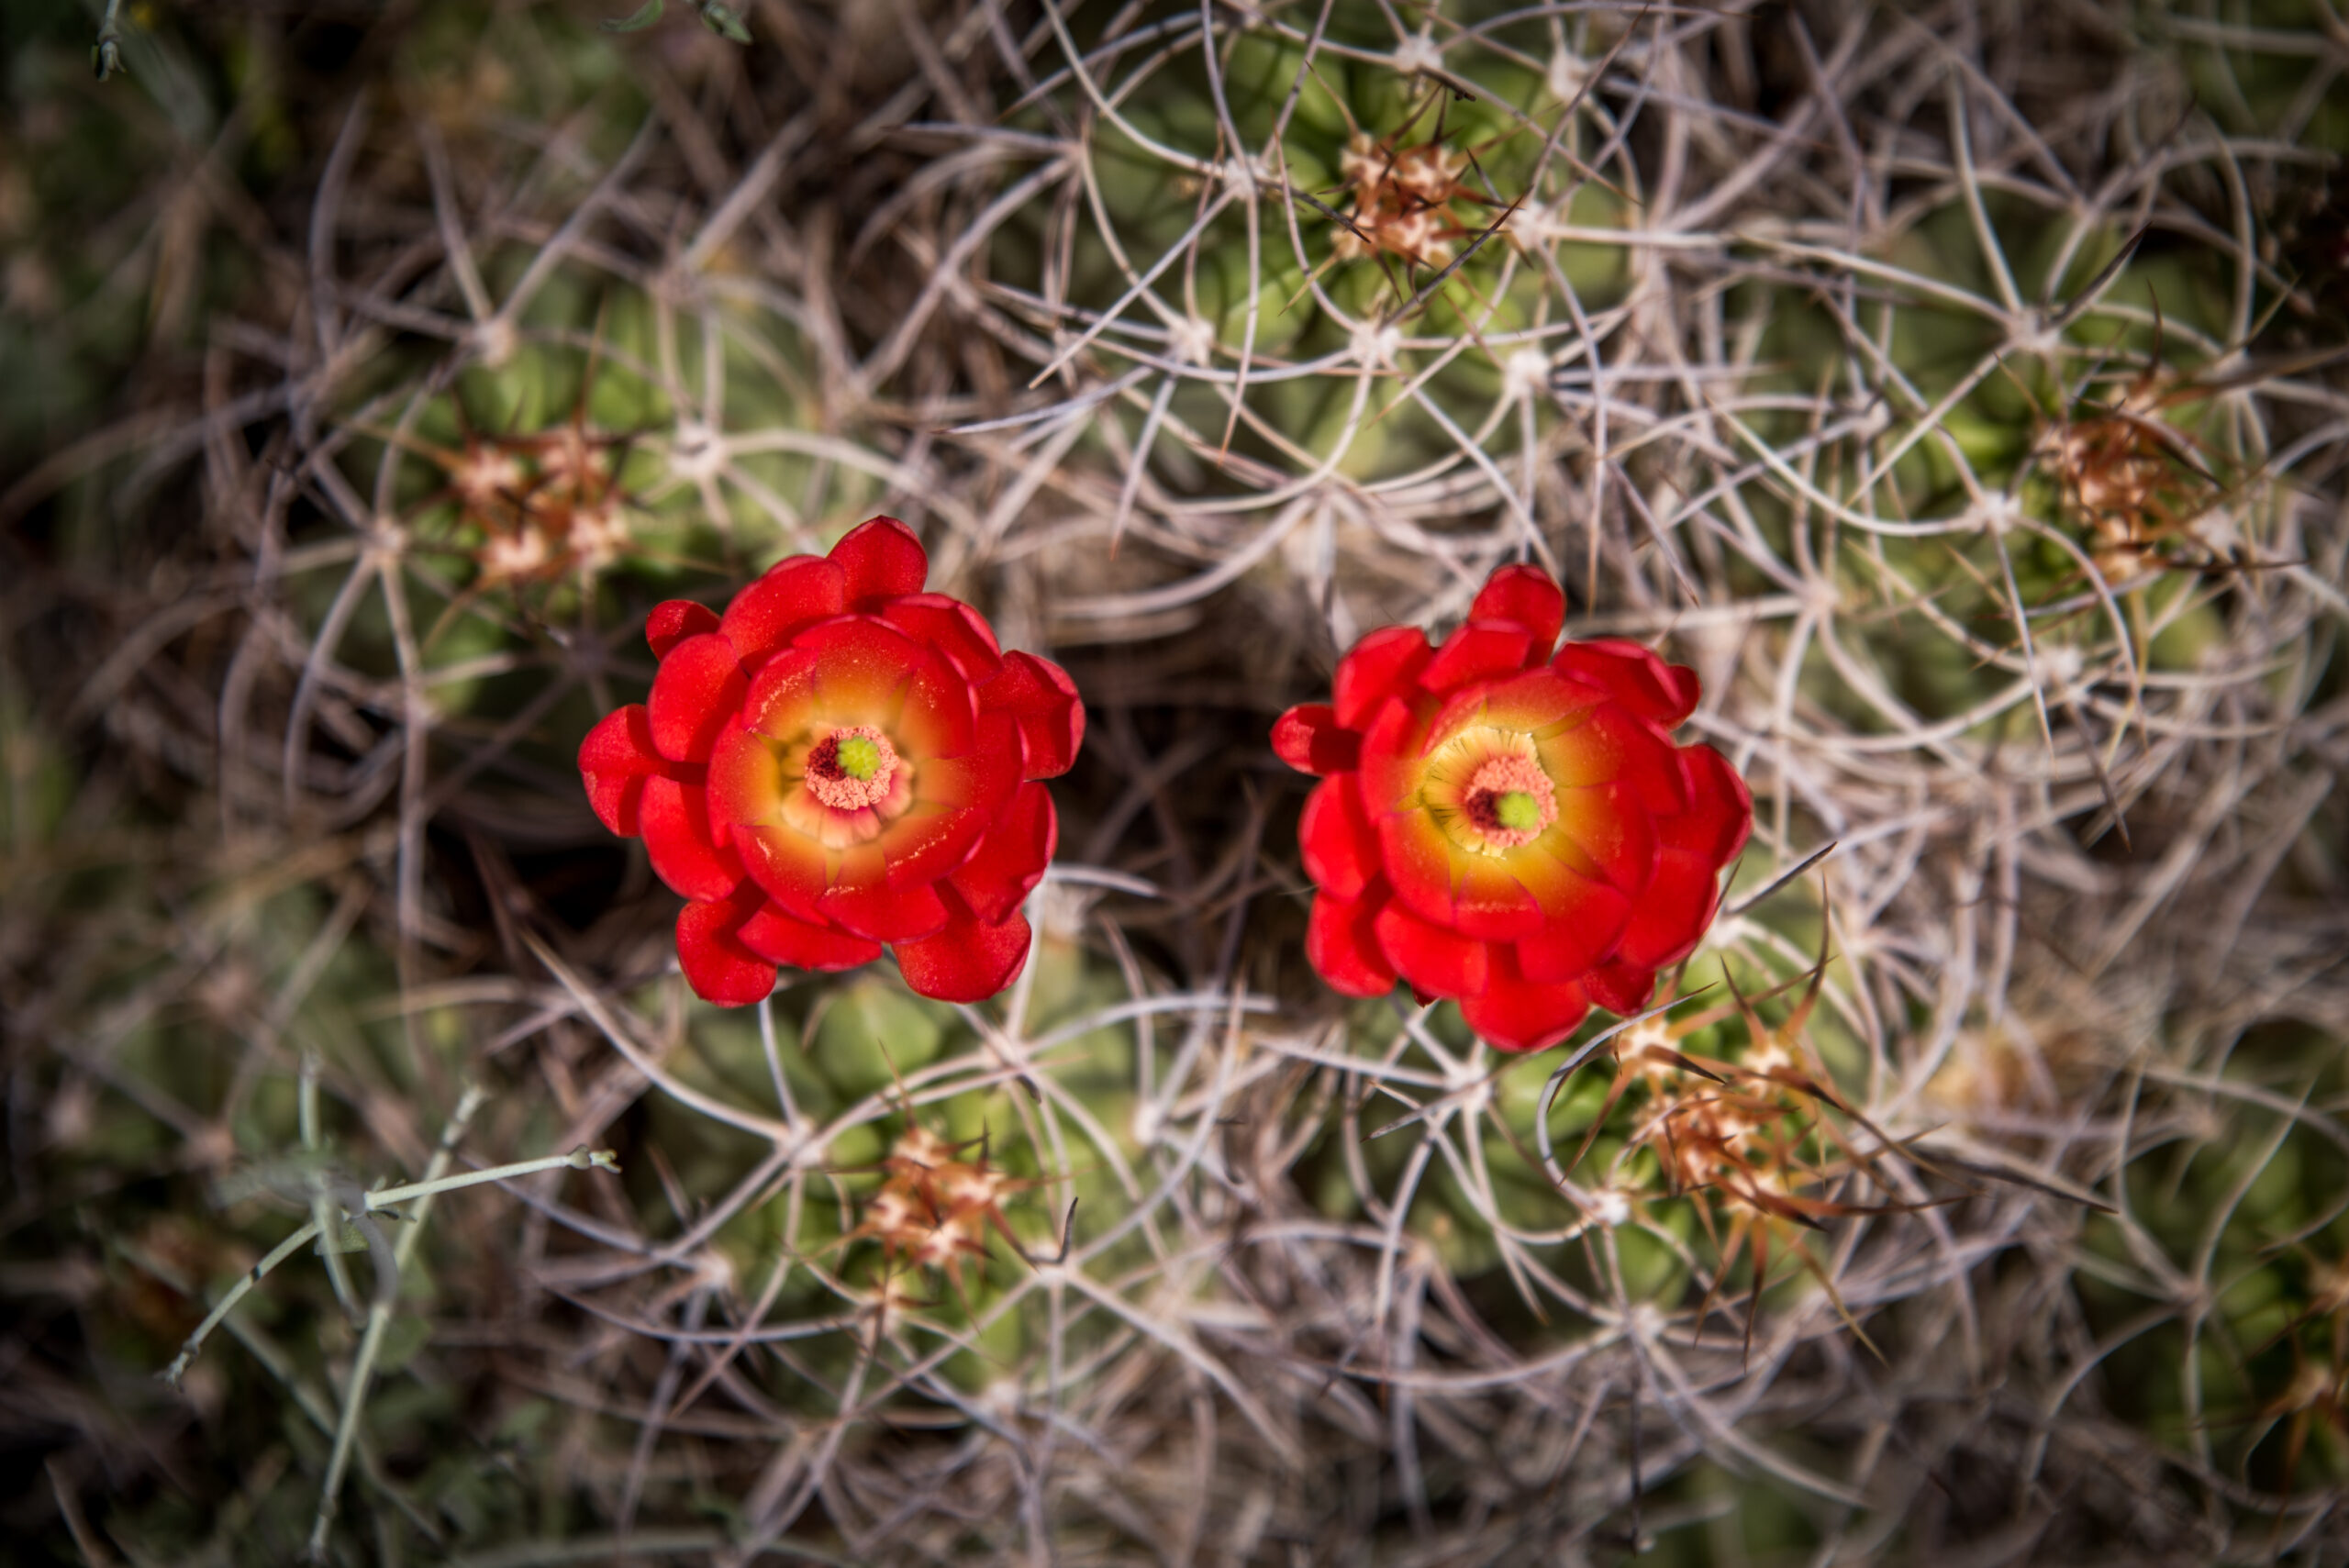 Two red flowers with yellow centers. They are growing off of a cactus and you can see the cactus spikes all around them.